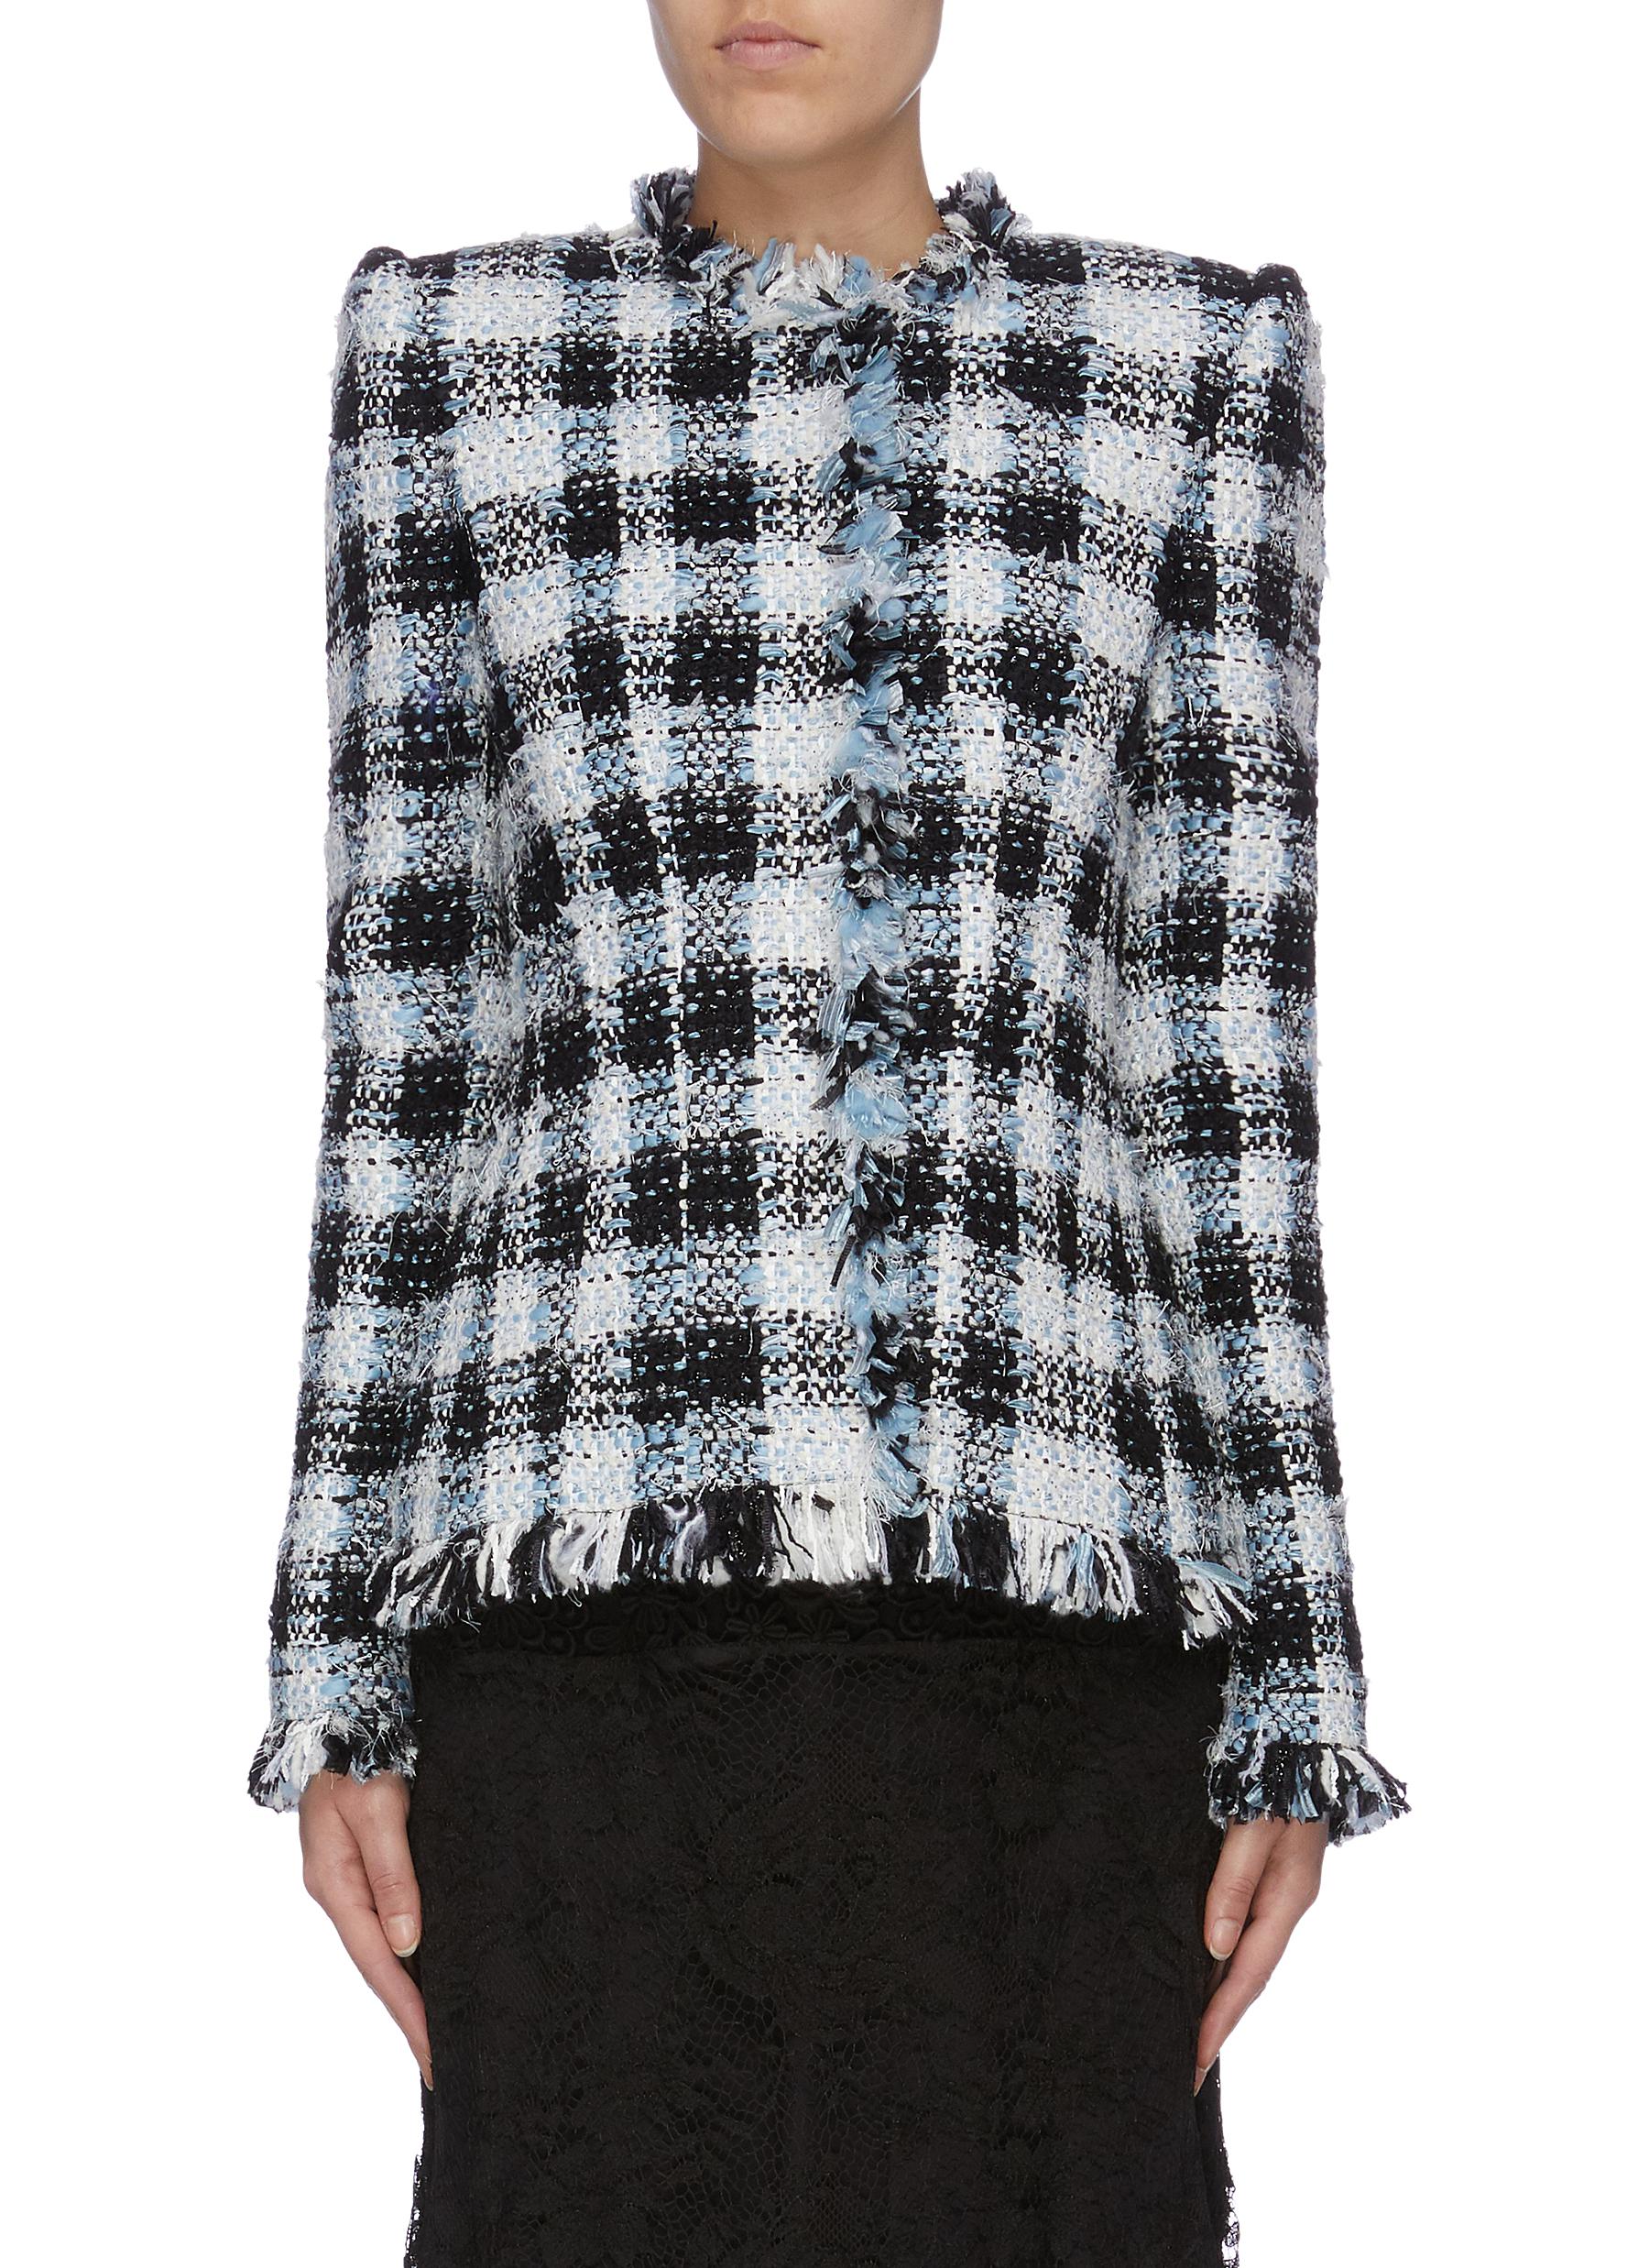 Frayed border check plaid tweed jacket by Alexander Mcqueen